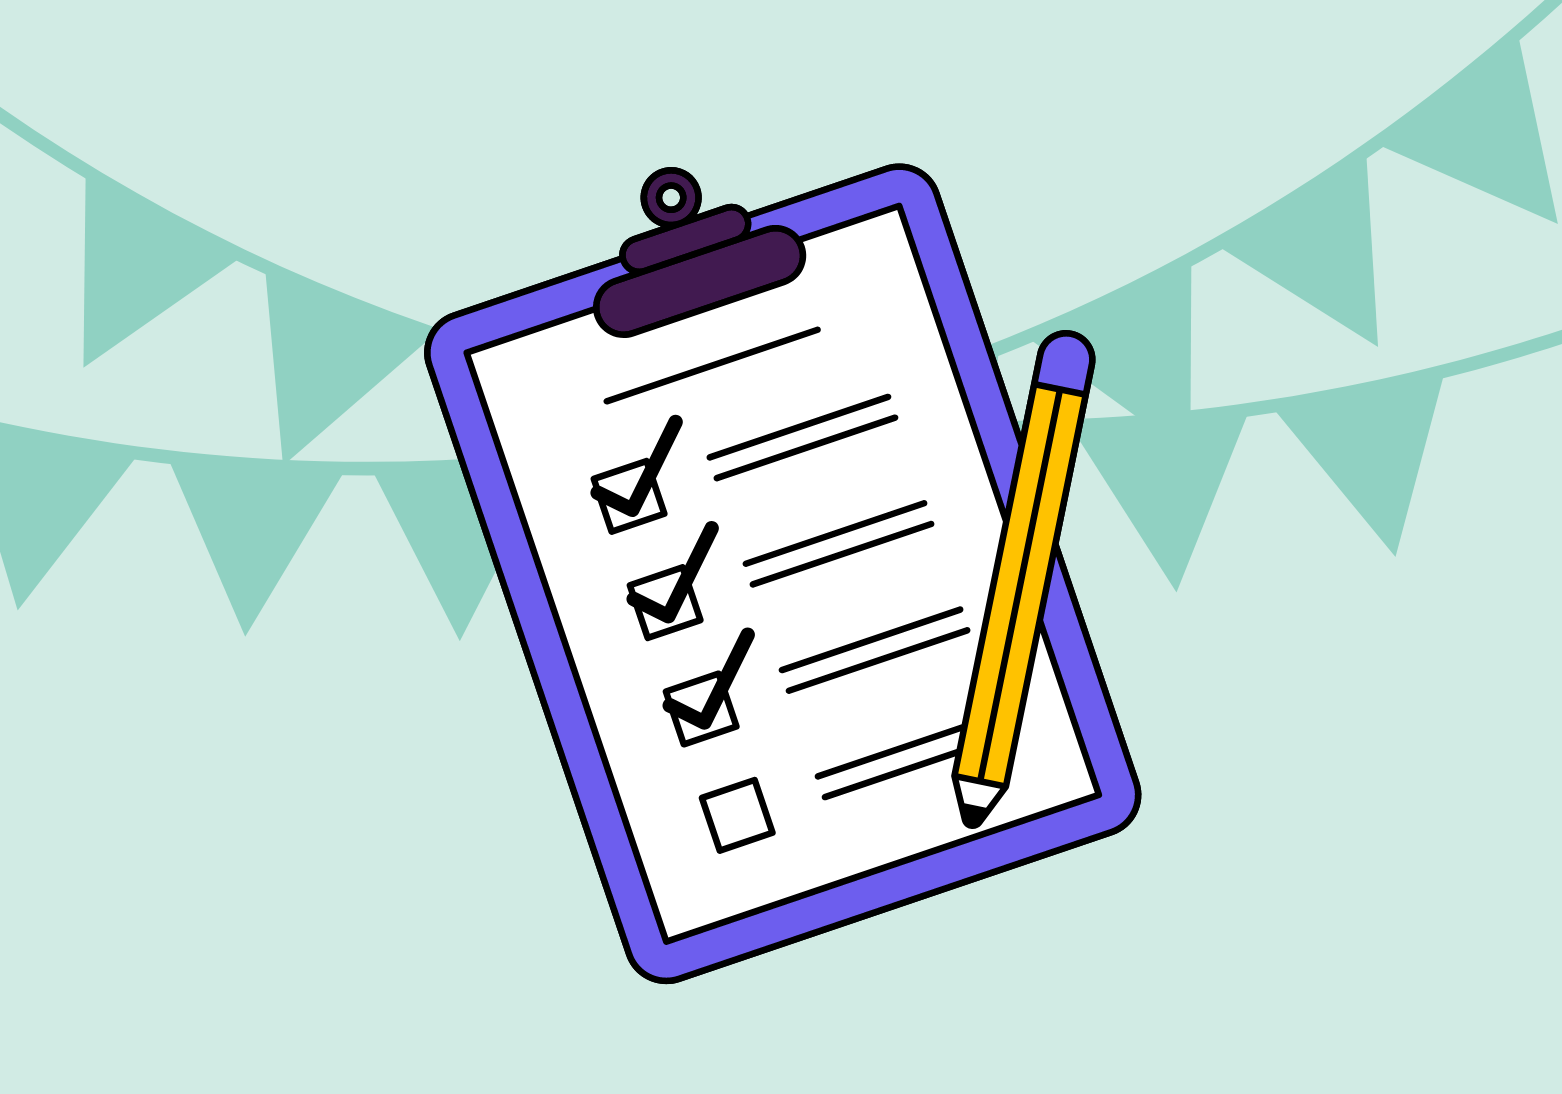 The event checklist used by top event planners